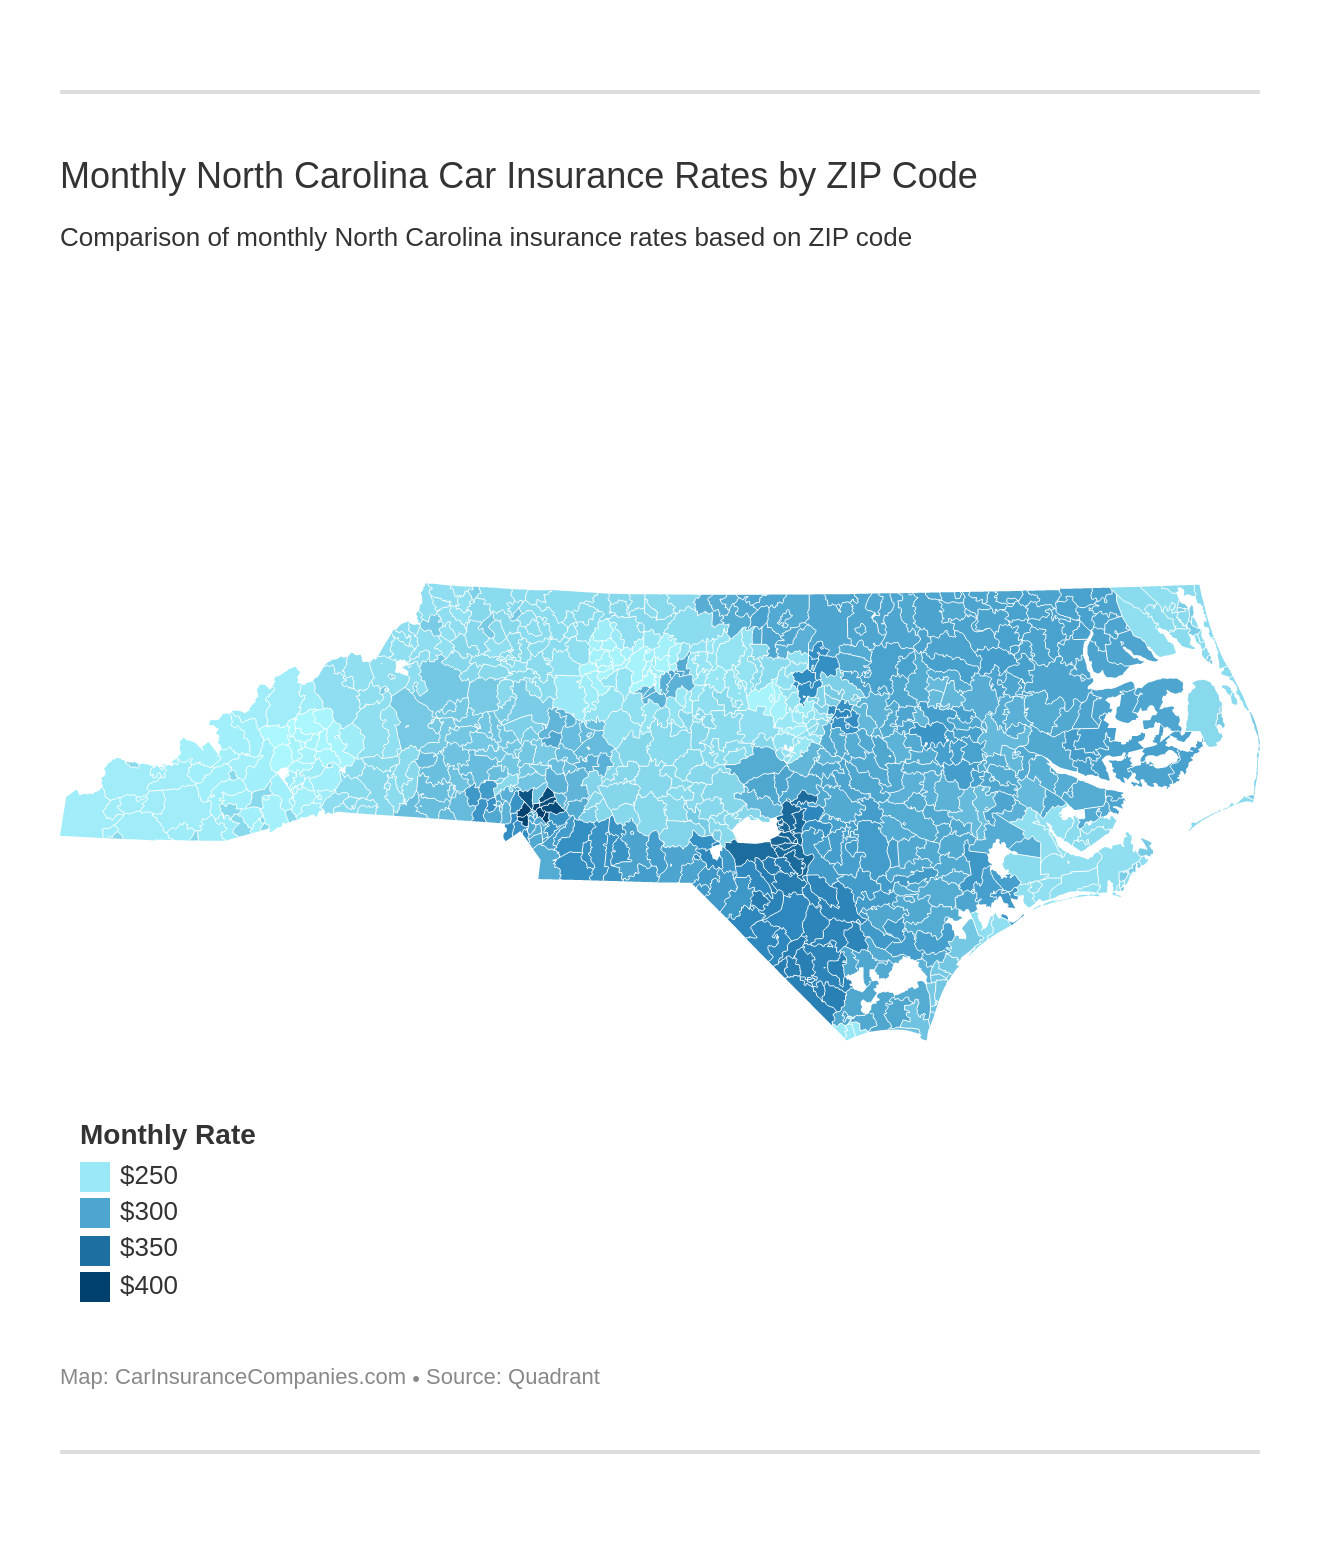 Monthly North Carolina Car Insurance Rates by ZIP Code